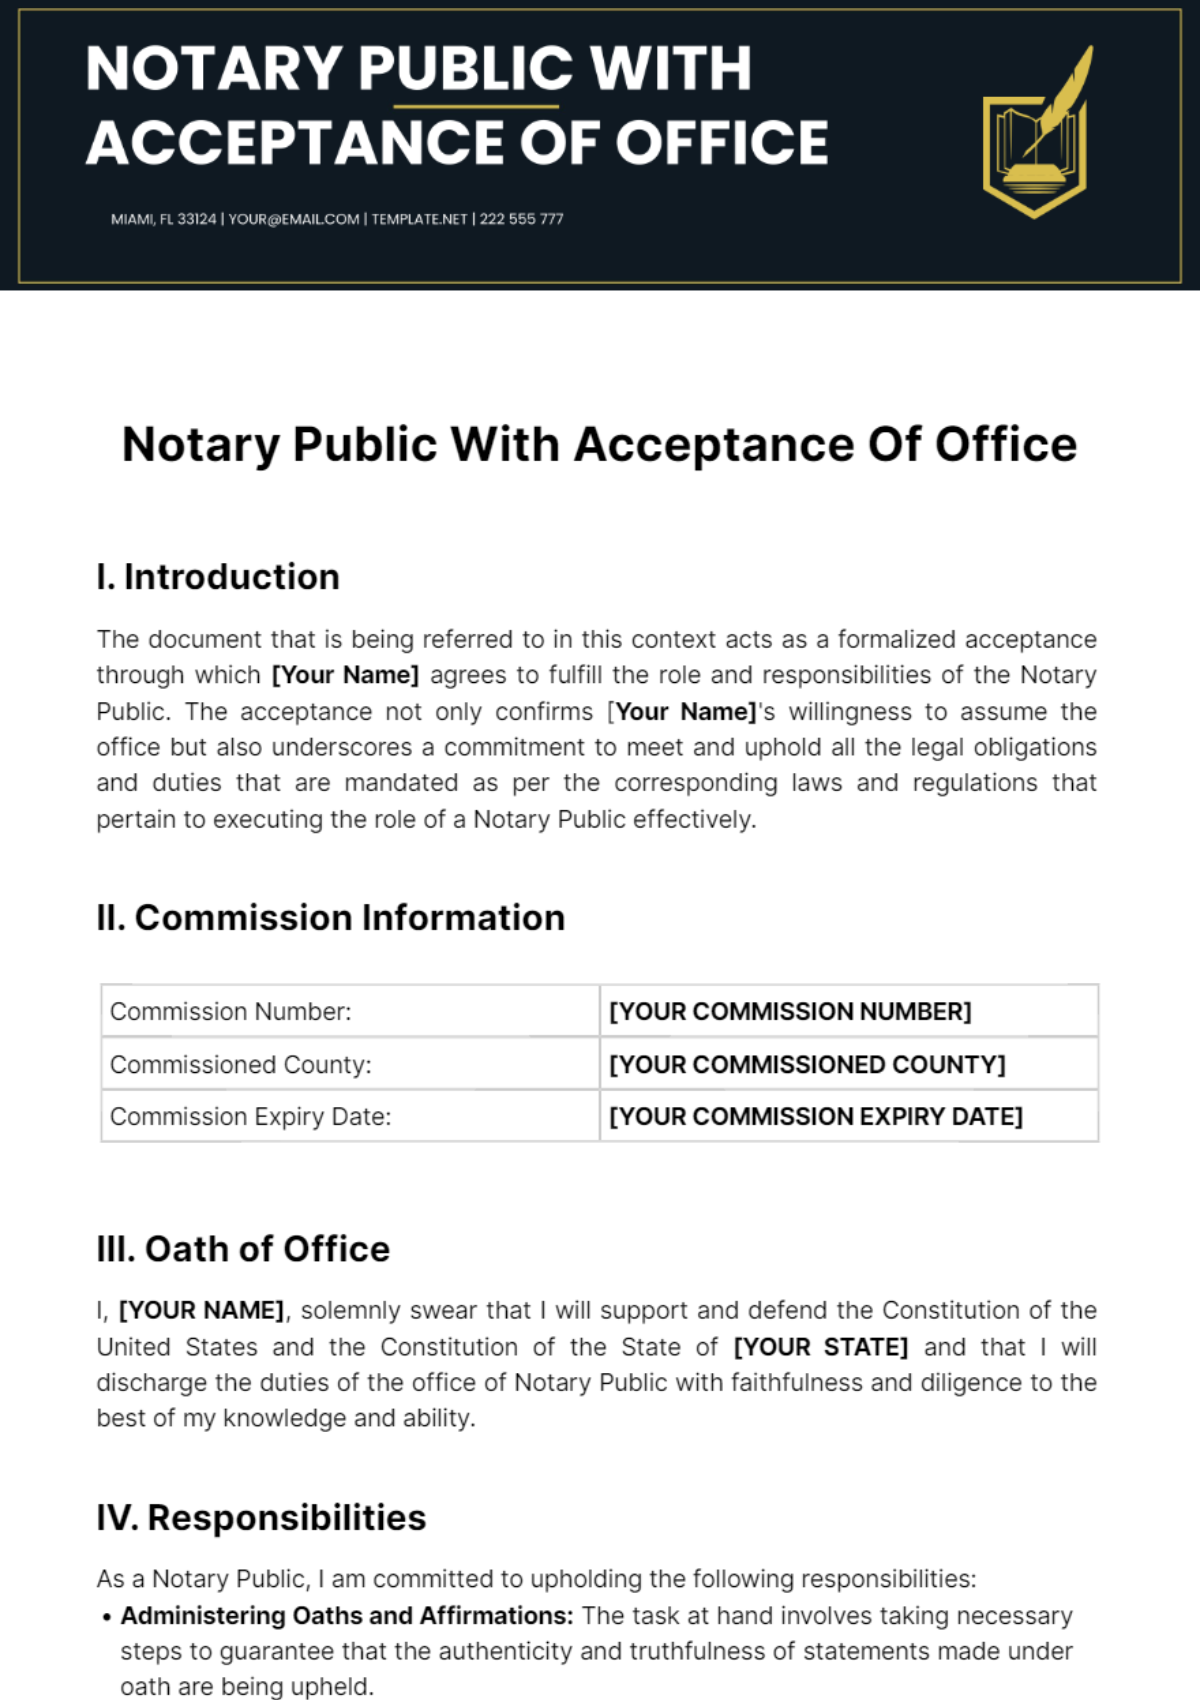 Free Notary Public With Acceptance Of Office Template